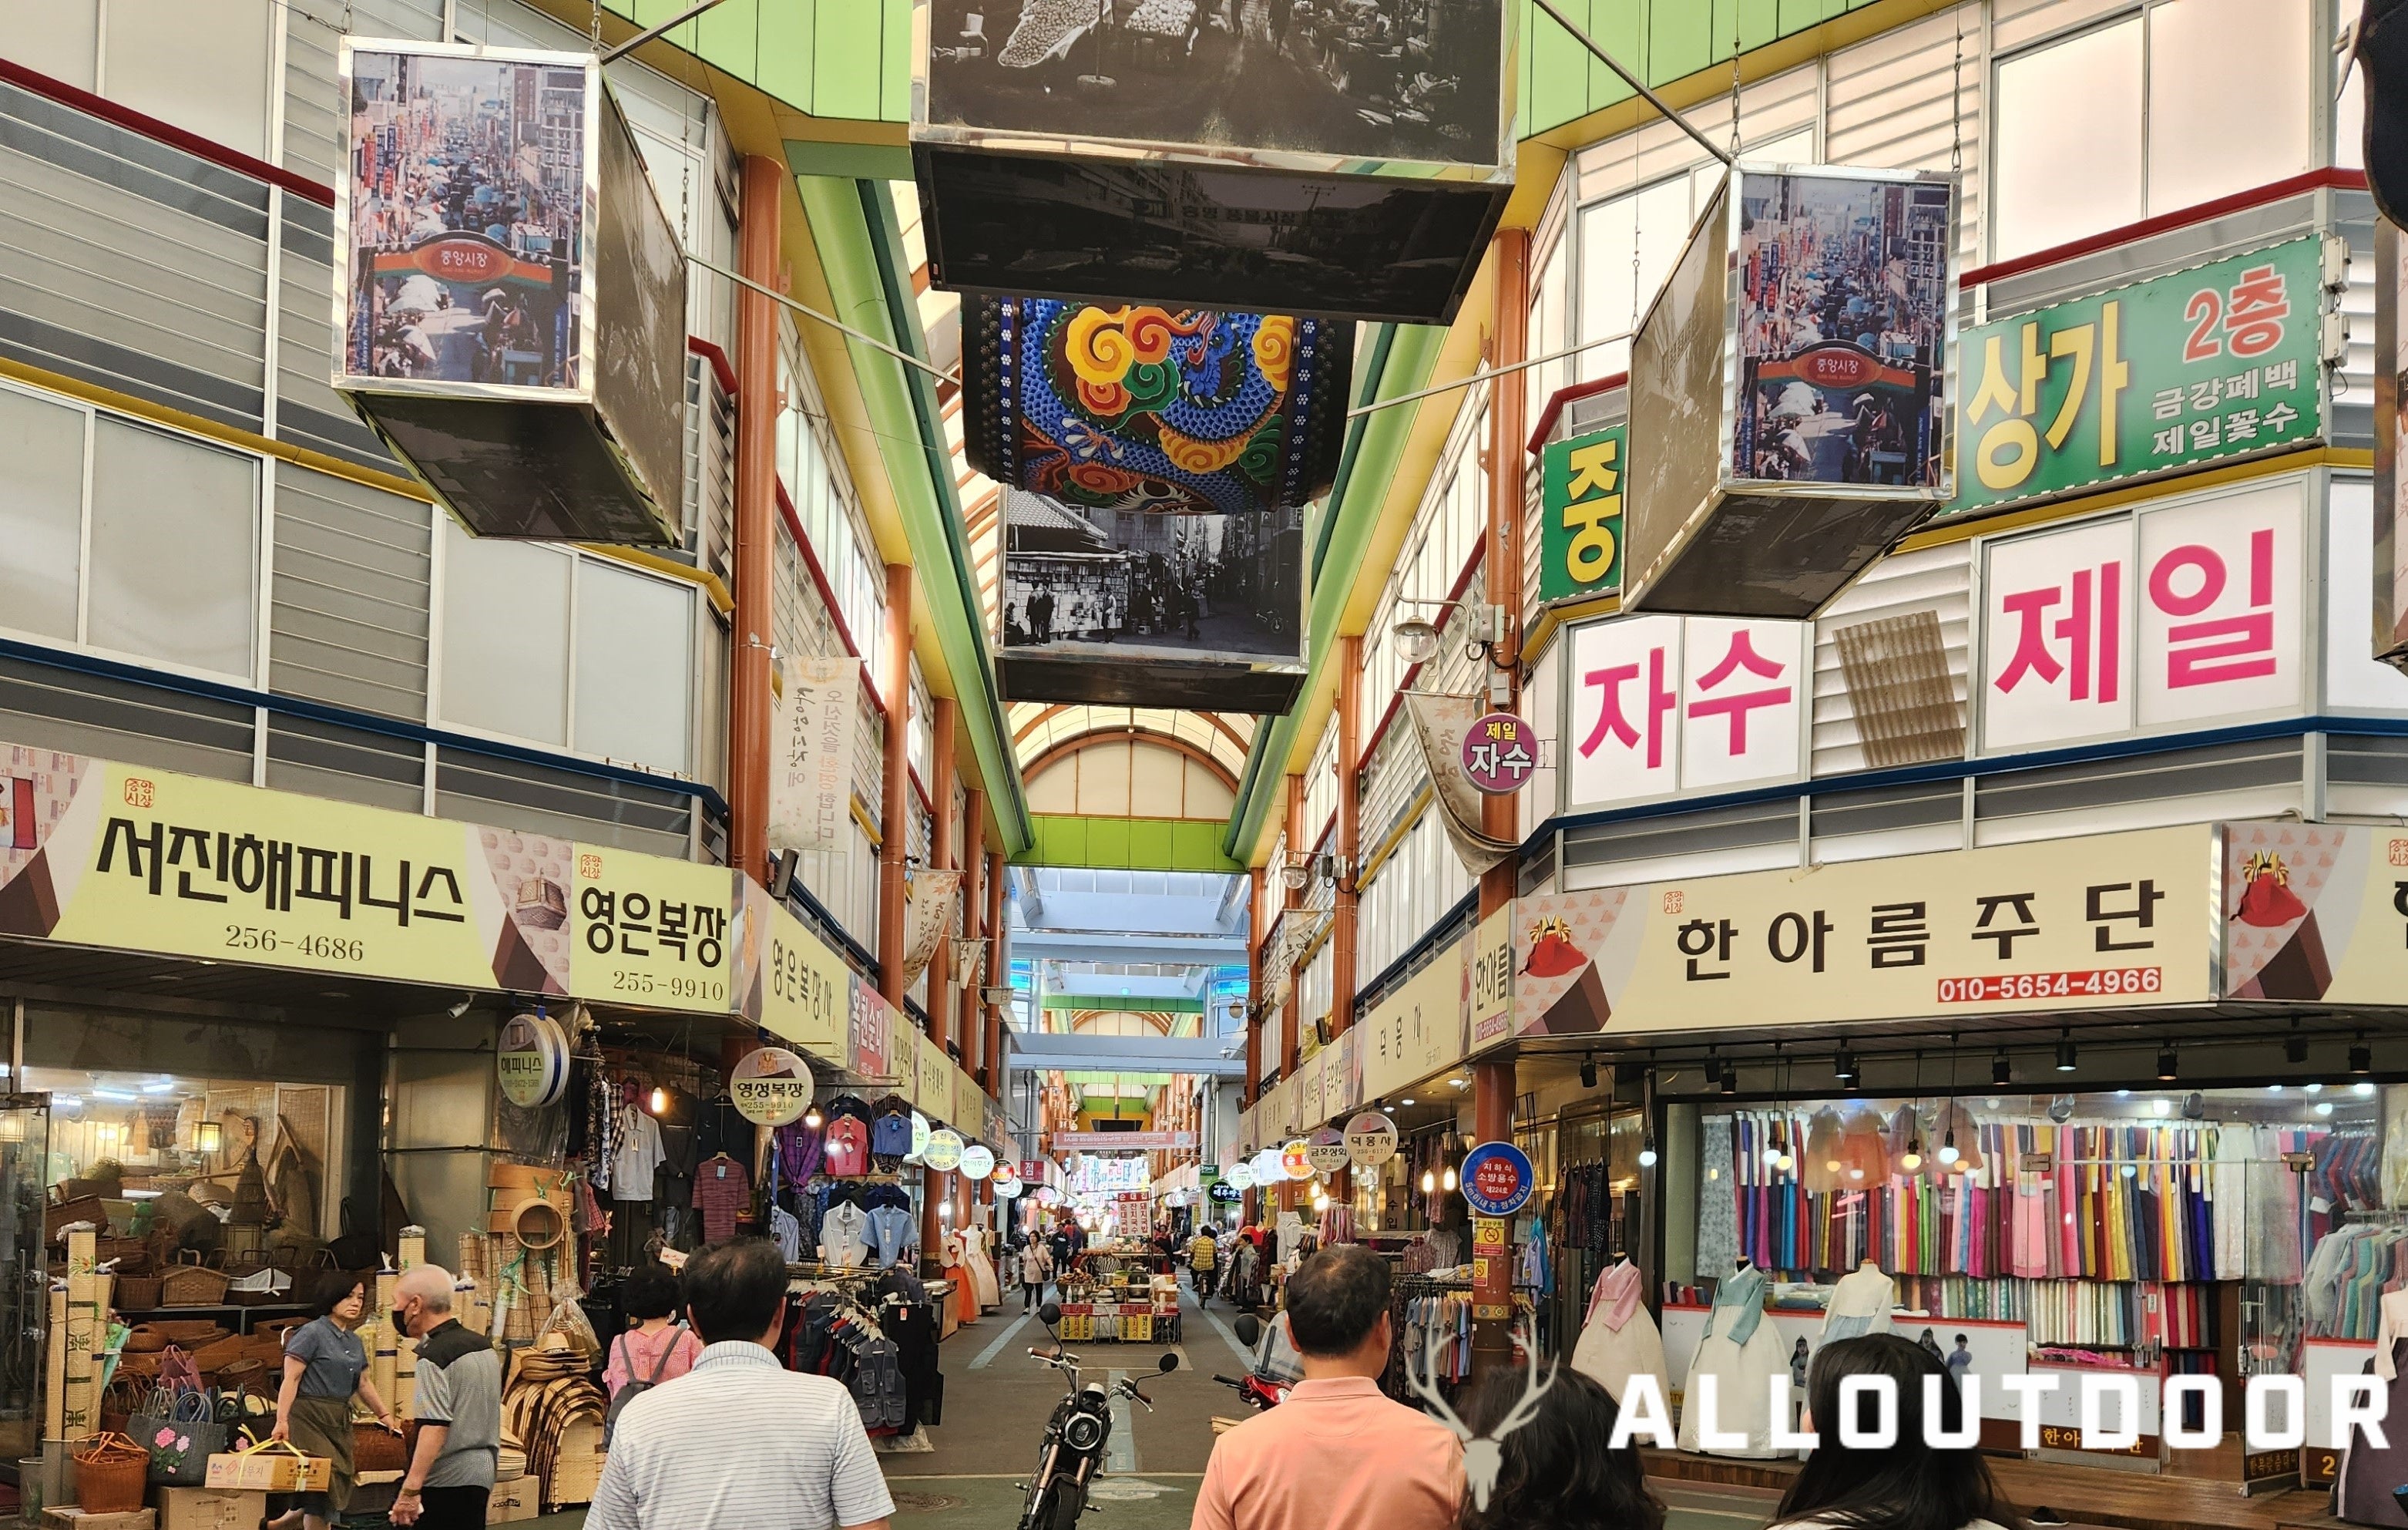 A Day in Daejeon - Visiting a South Korean Open Air Market